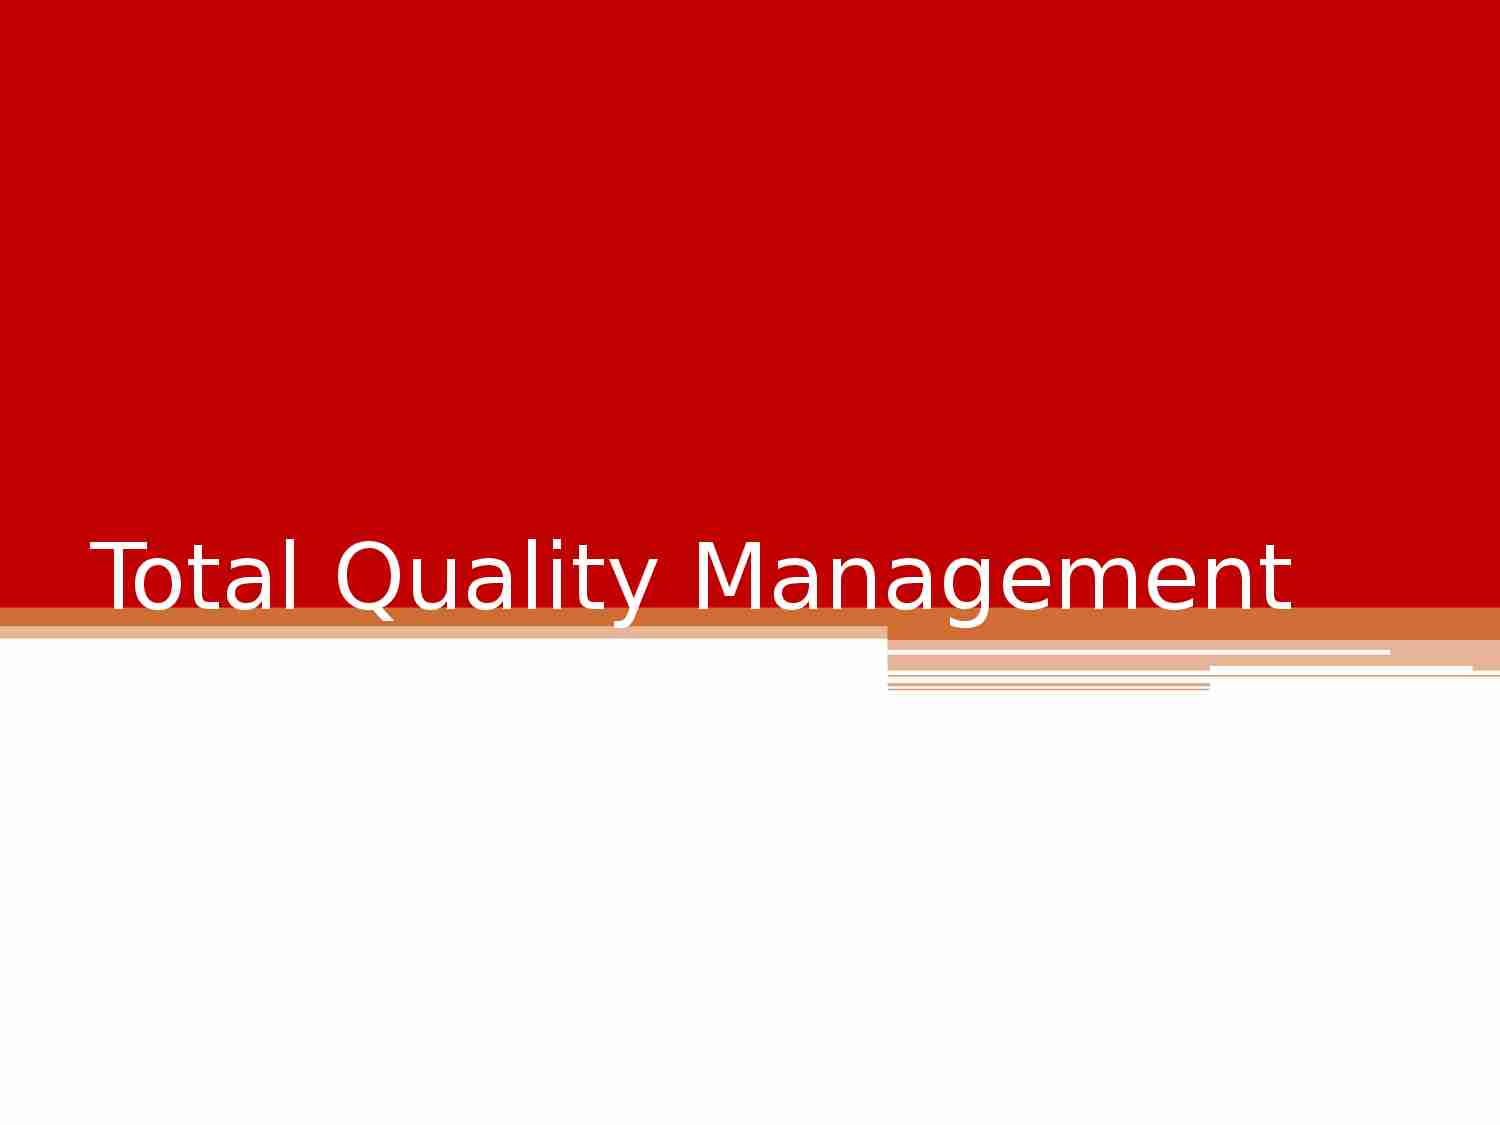 Total Quality Management - strona 1